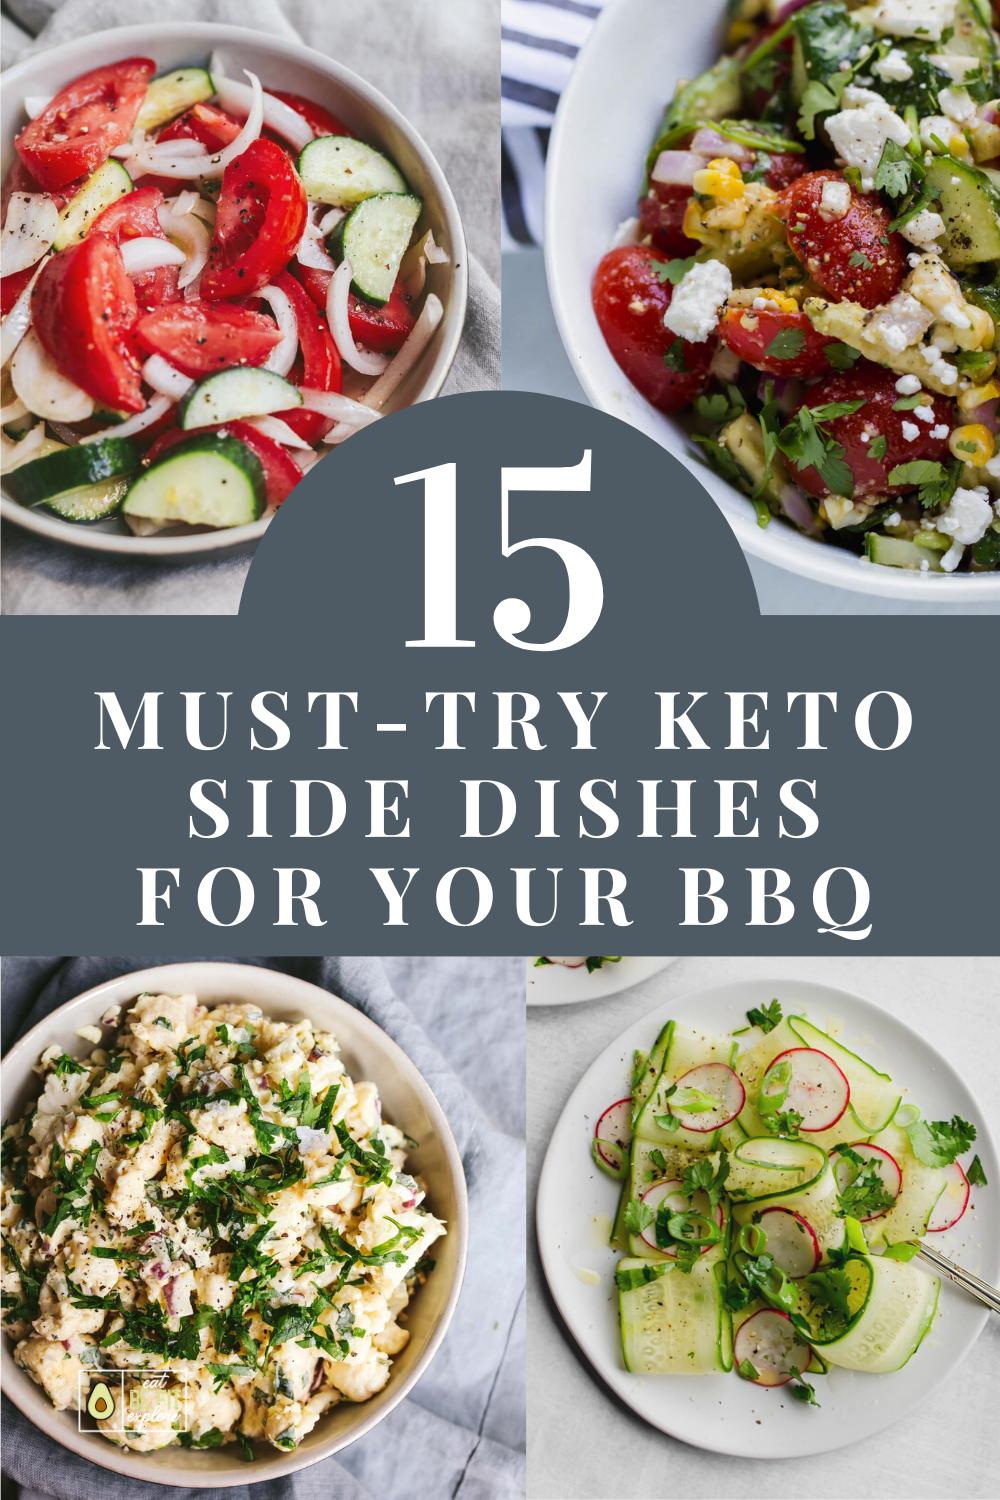 Must-Try Keto Side Dishes for Your BBQ